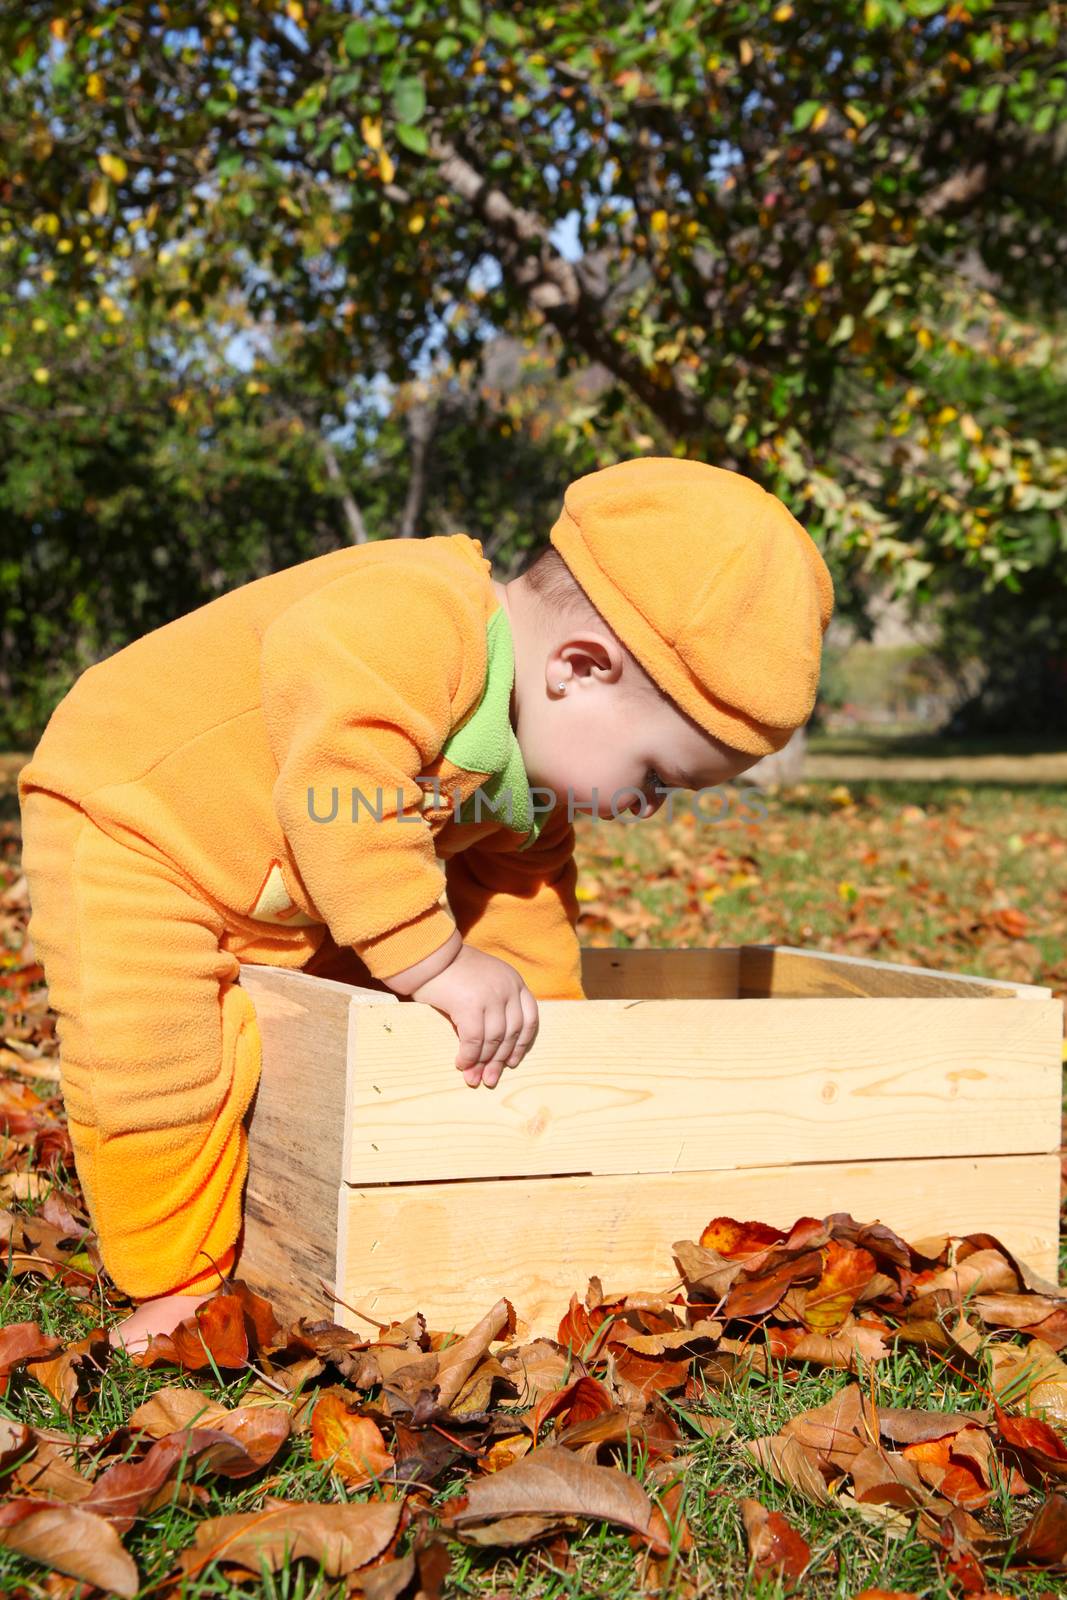 Halloween baby dressed as a pumkin playing outdoors during fall